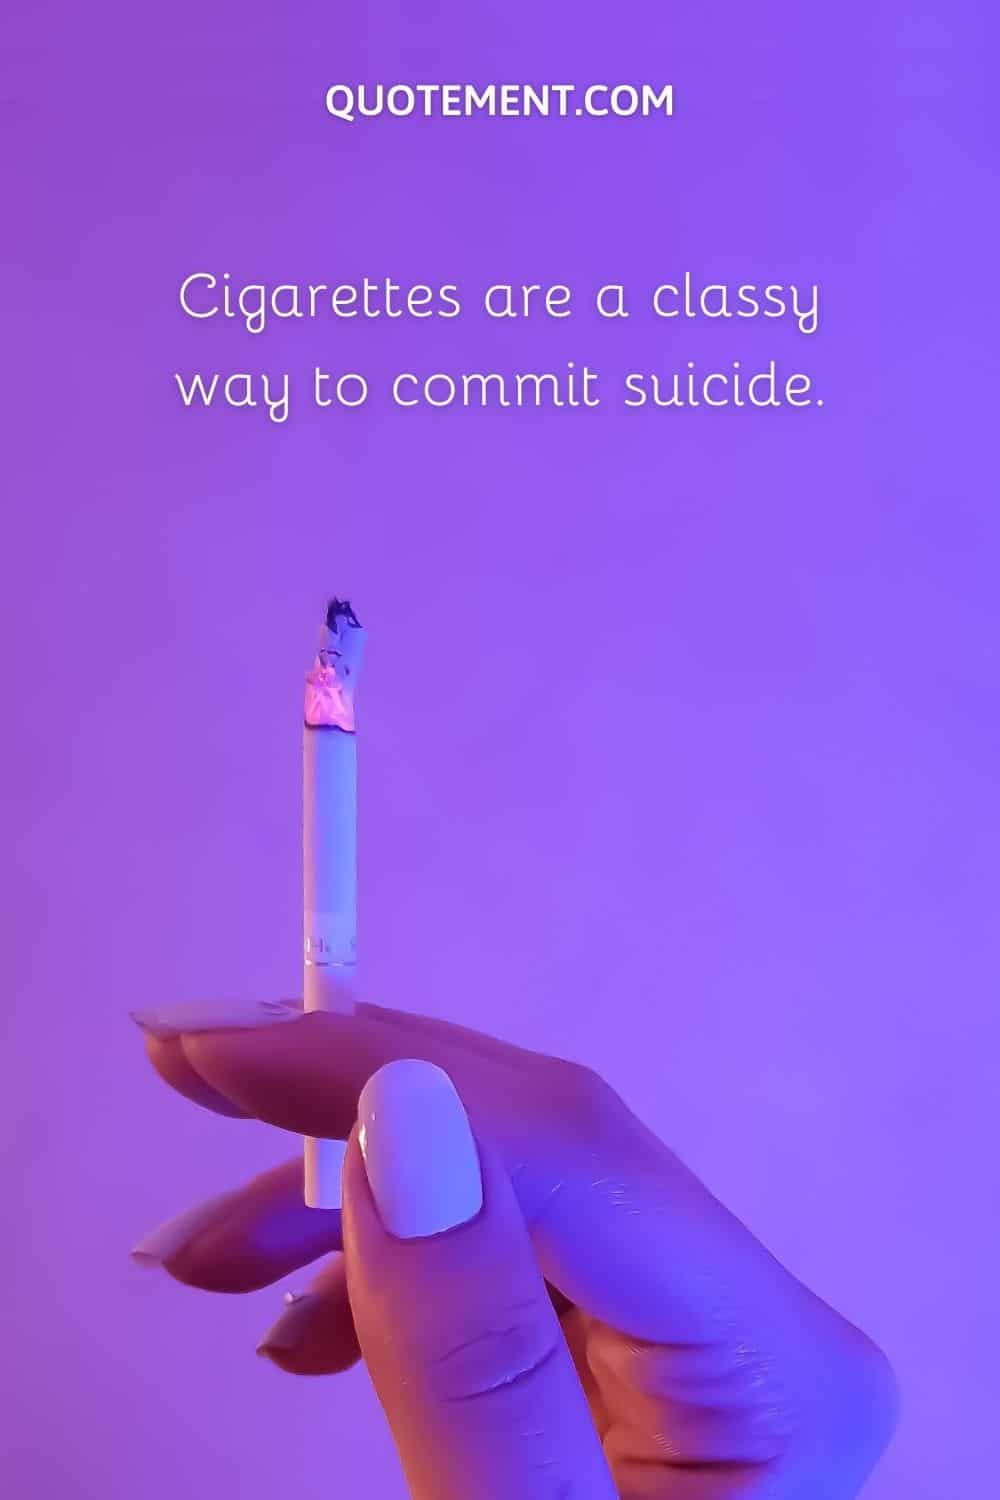 Cigarettes are a classy way to commit suicide